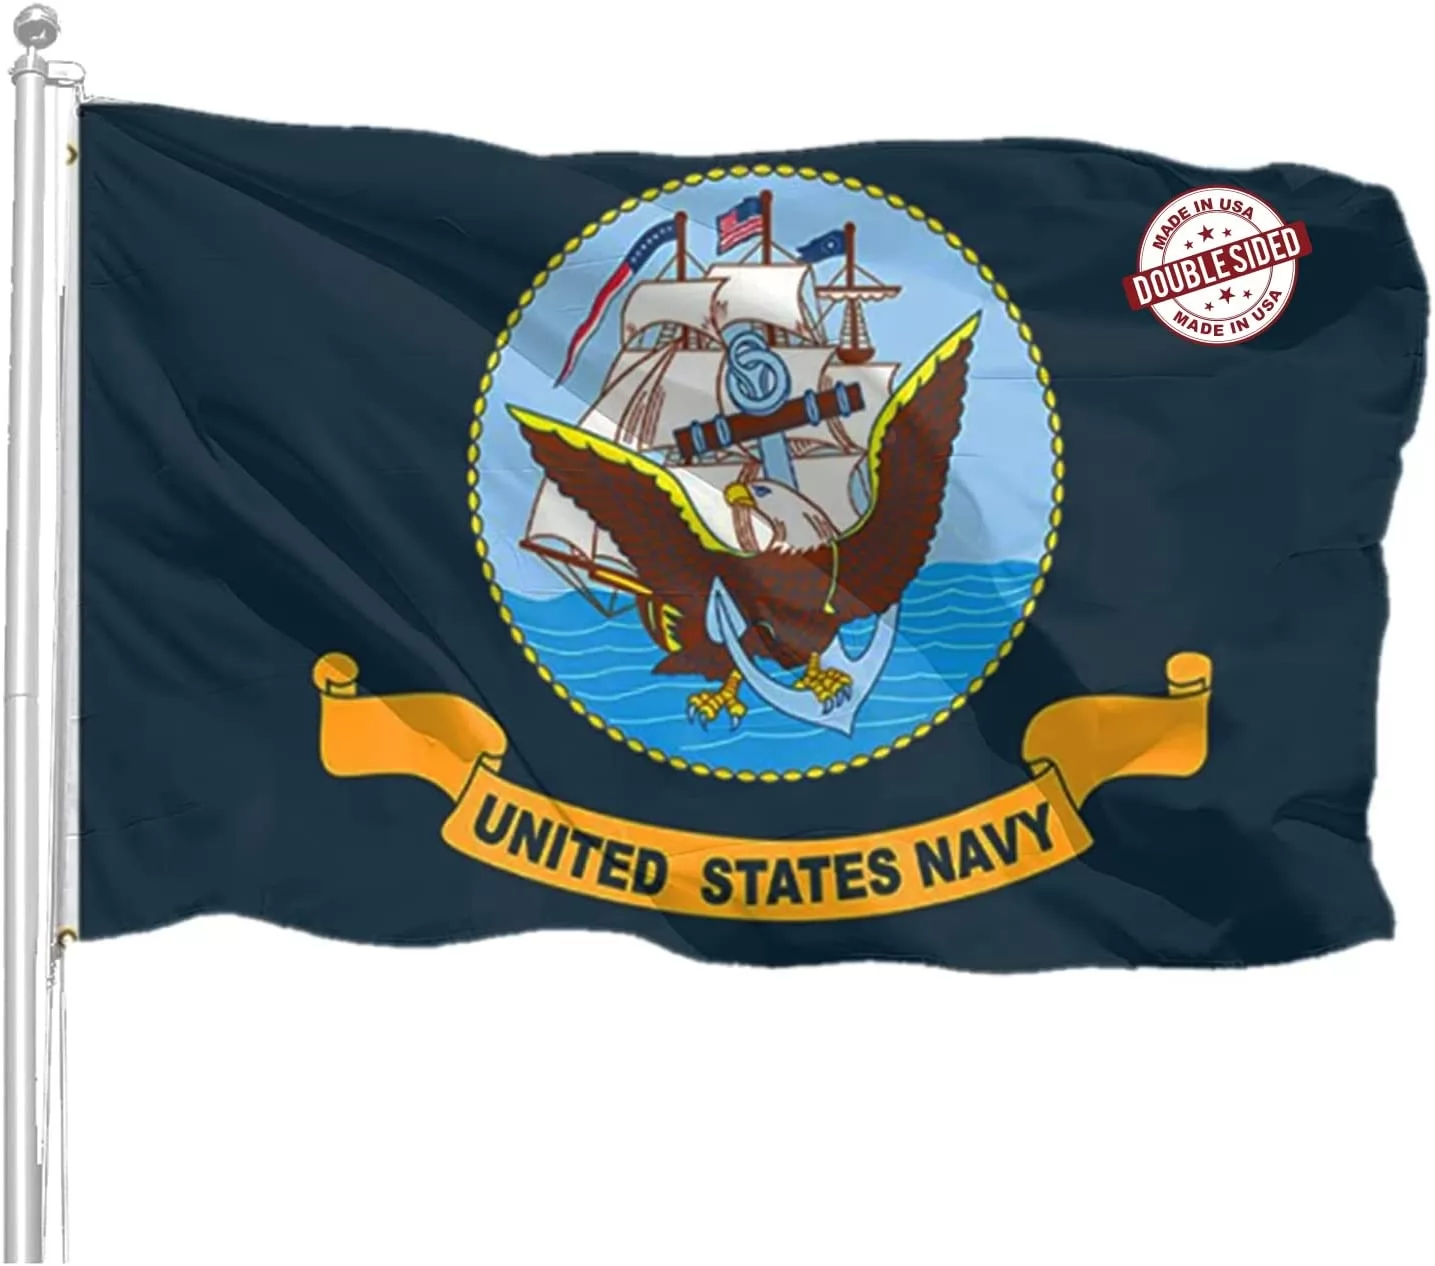 Navy Flag Military US 3x5 Ft - Double Sided USN Army Flags United States Naval Heavy Duty 3ply